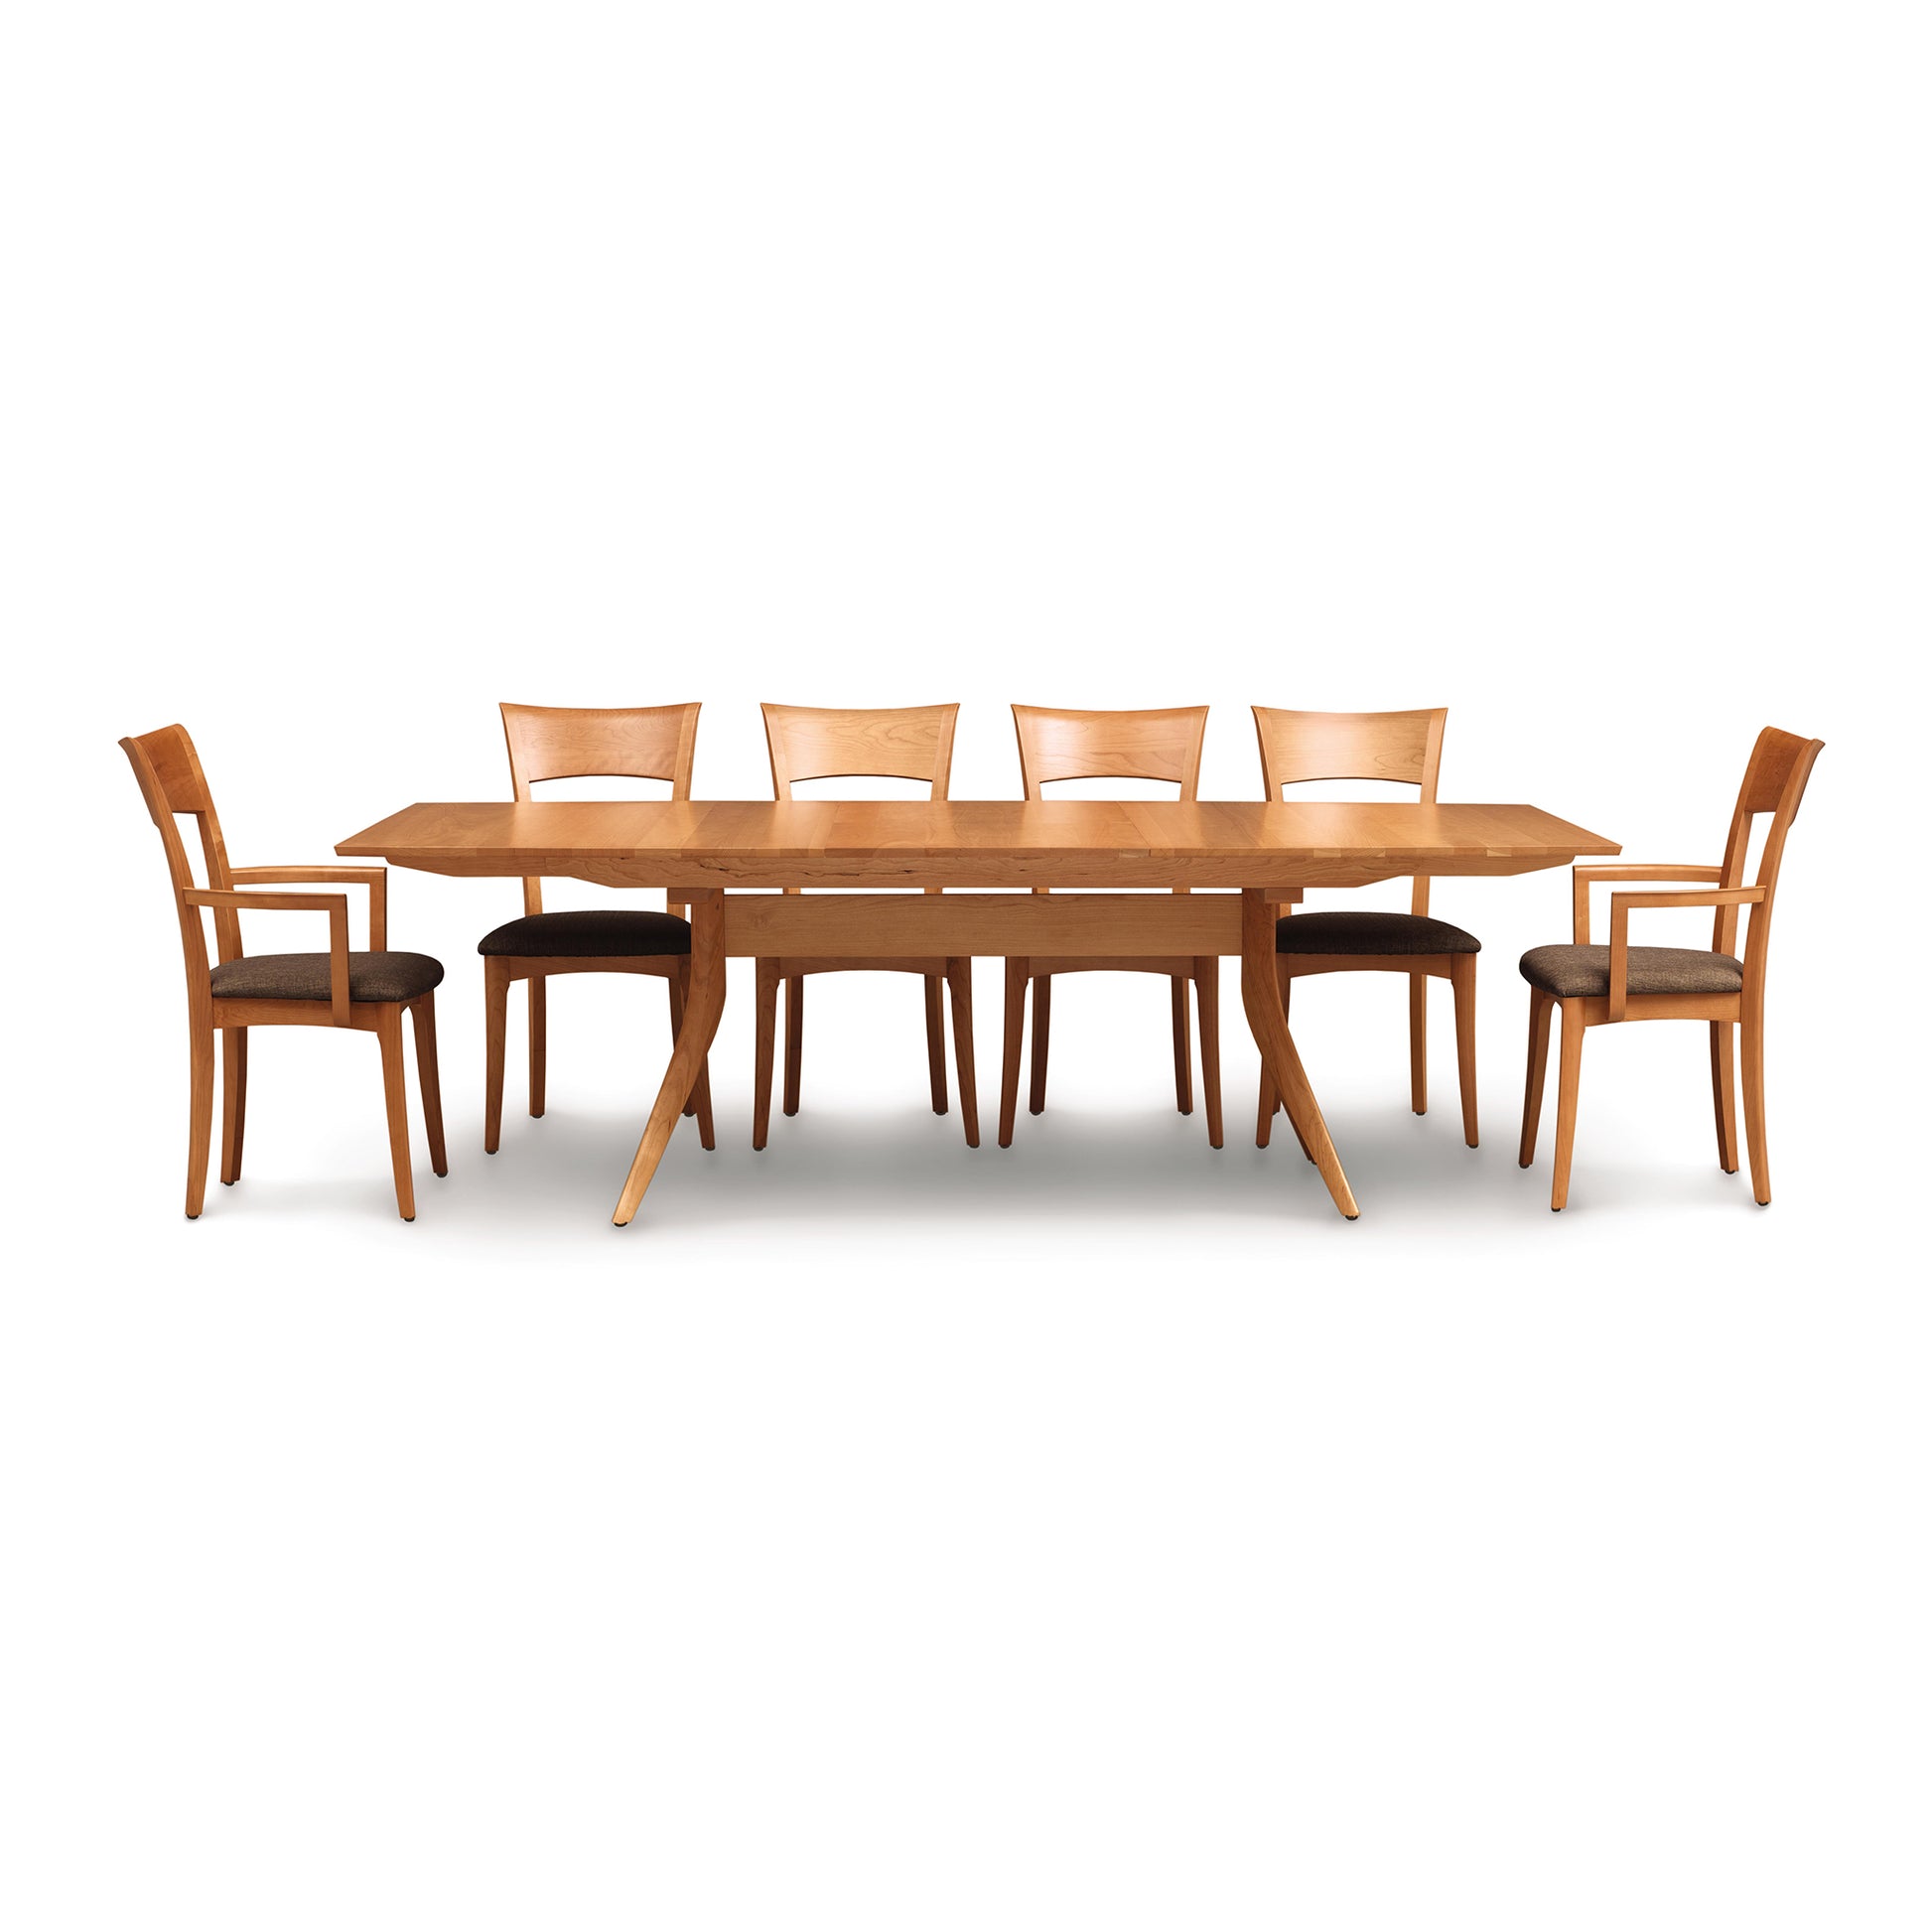 A solid American hardwood dining table set with six matching chairs on a plain white background, featuring the design of Copeland Furniture's Catalina Trestle Extension Table.